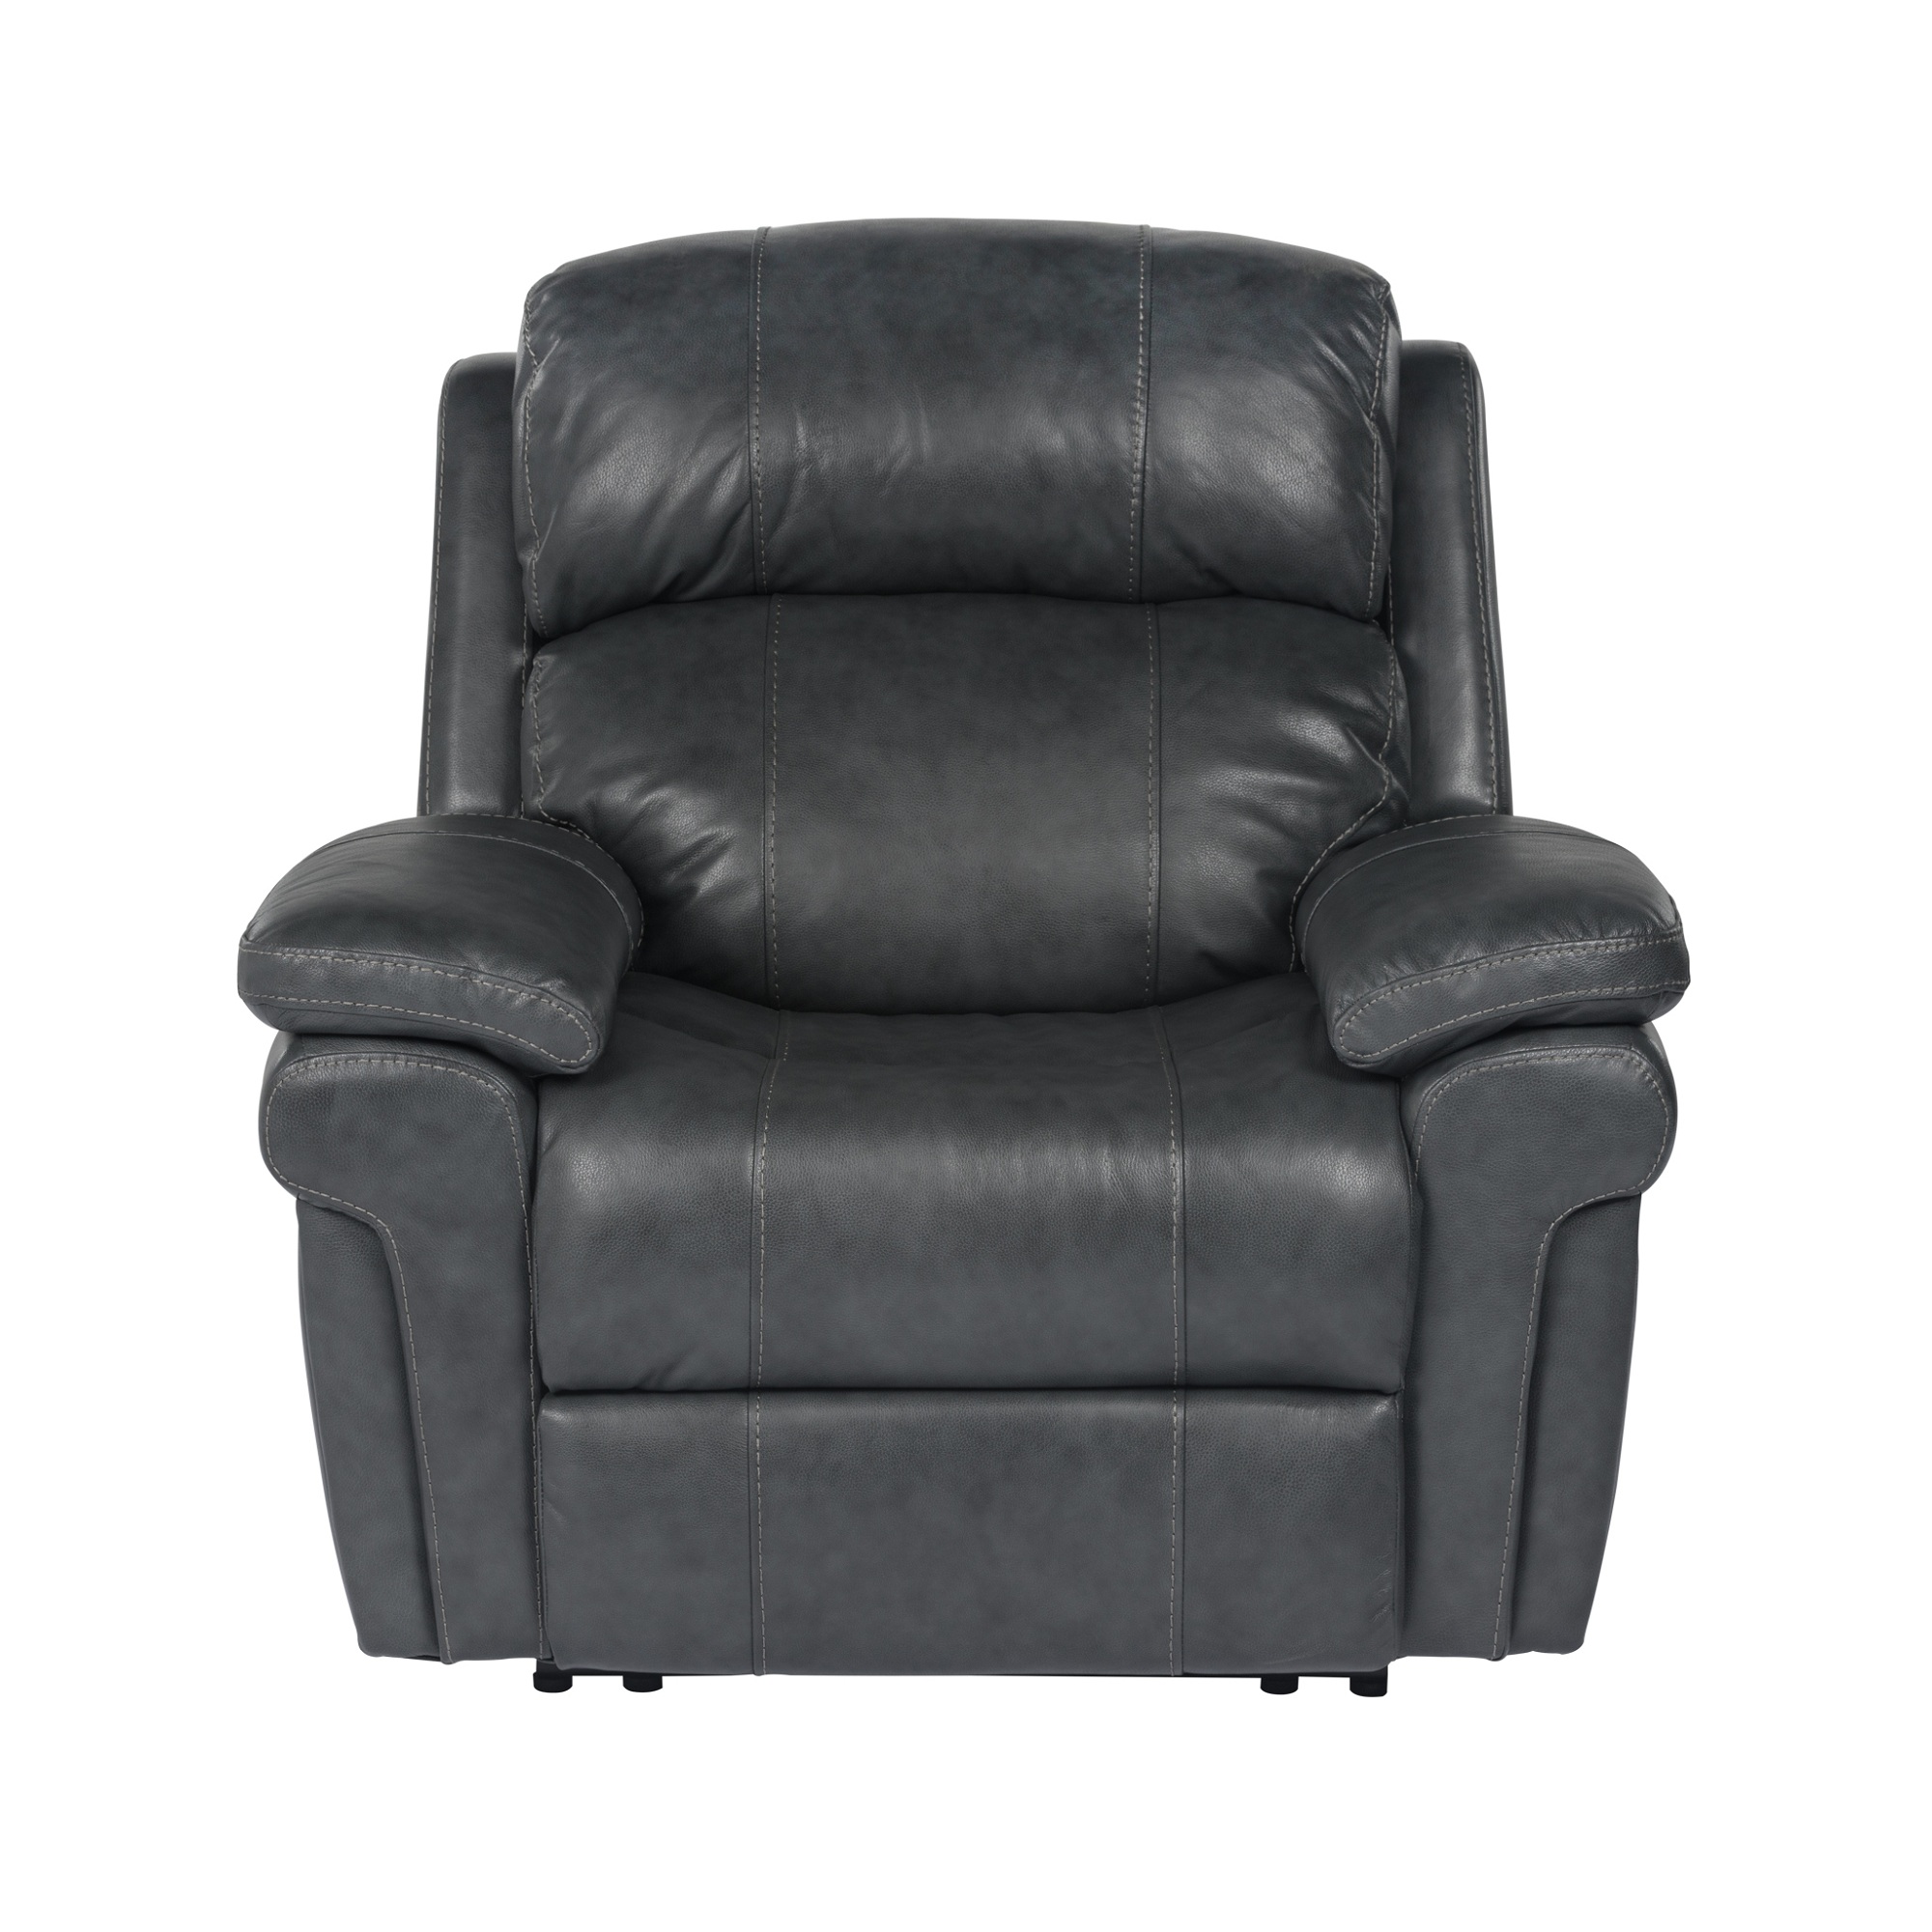 The Hamptons Collection 51" Black Leather Power Reclining Chair